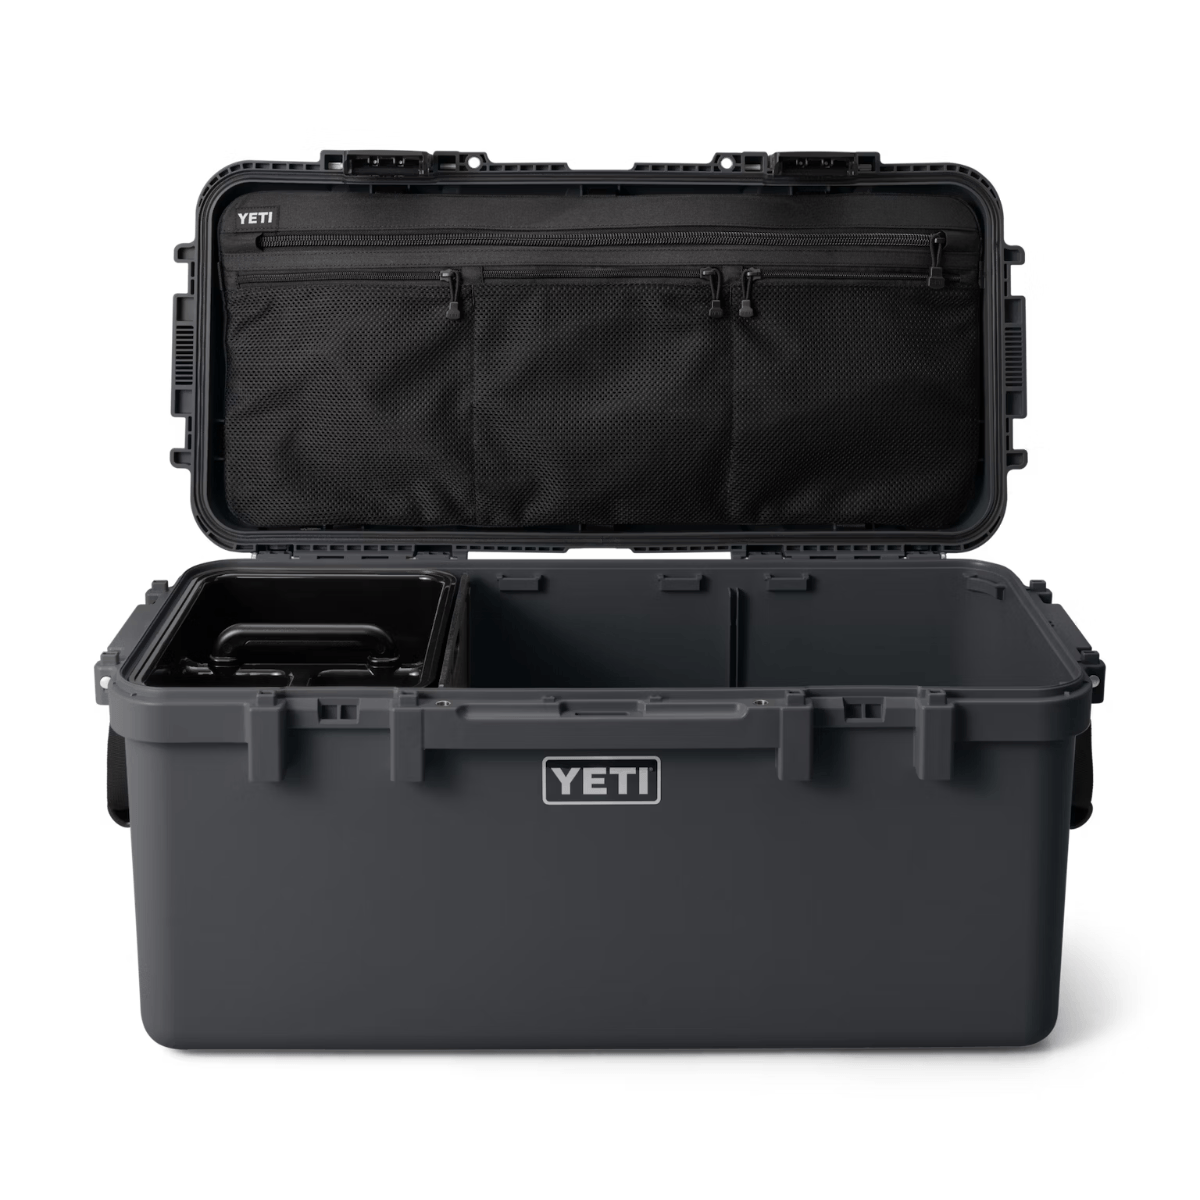 Keep Your Gear Safe and Organized with a Yeti GoBox 